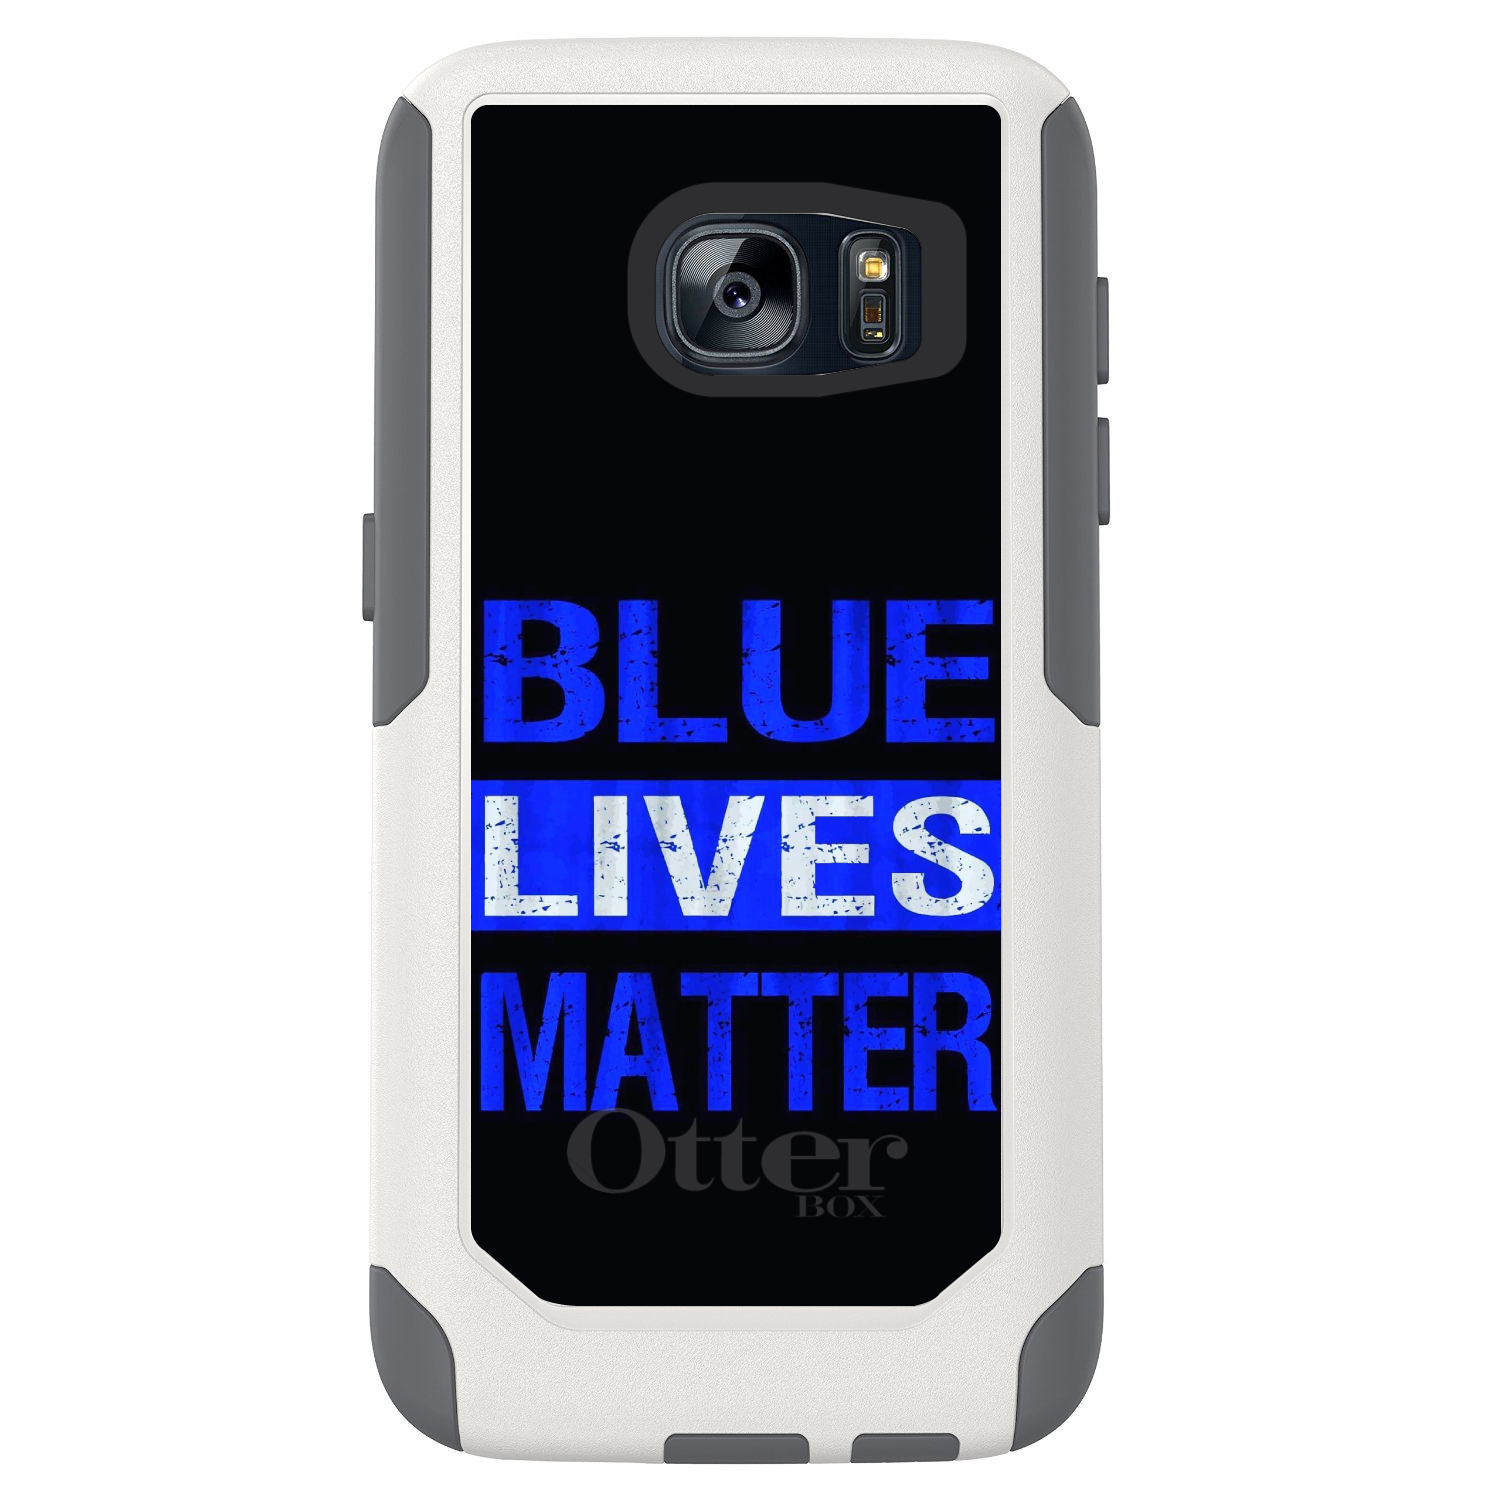 Galaxy Note Choose Model Blue Lives Matter Law Enforcement Custom OtterBox Defender for Galaxy S